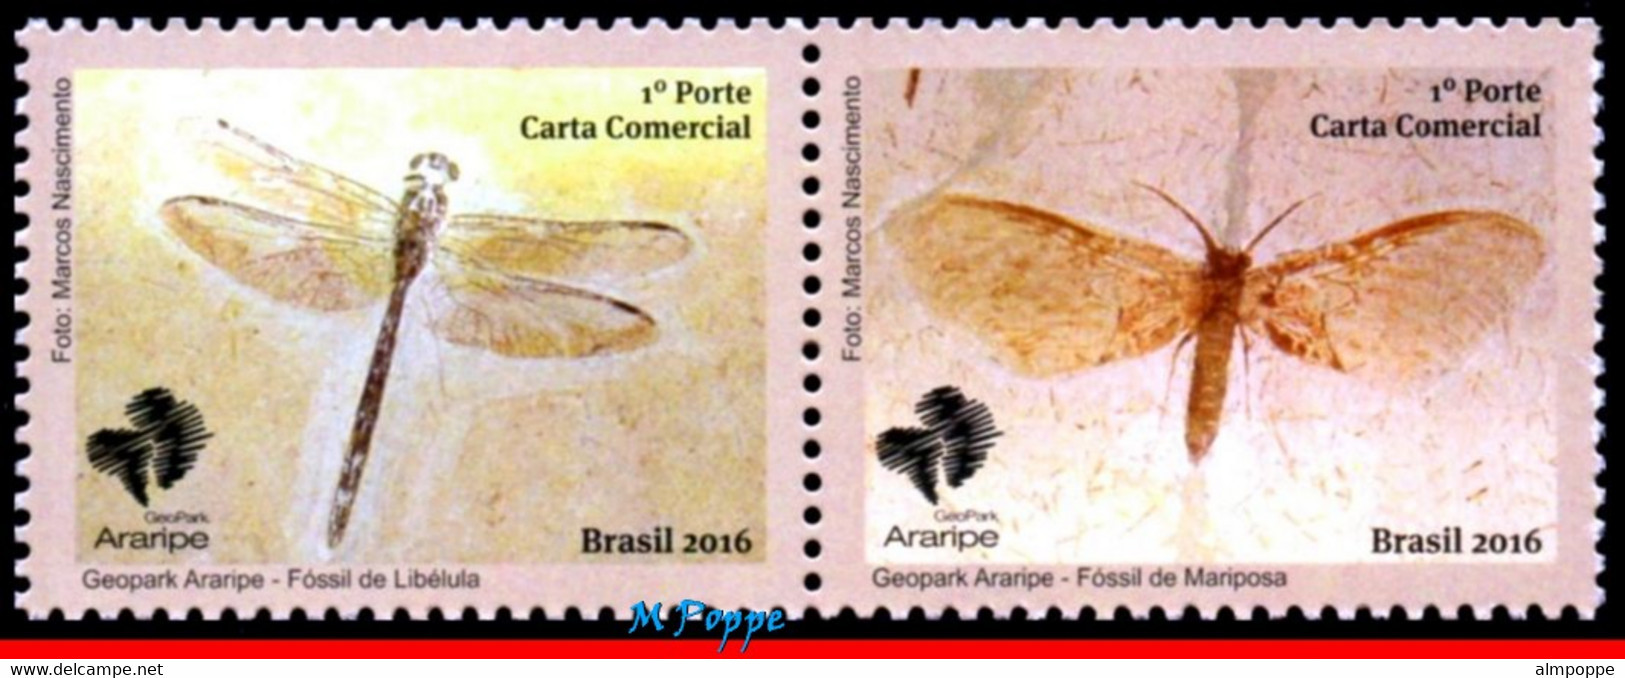 Ref. BR-V2016-26FO BRAZIL 2016 INSECTS, ARARIPE GEOPARK, INSECTS, FOSSILS, DRAGONFLY & BUTTERFLY,SHEET MNH 24V - Fossili